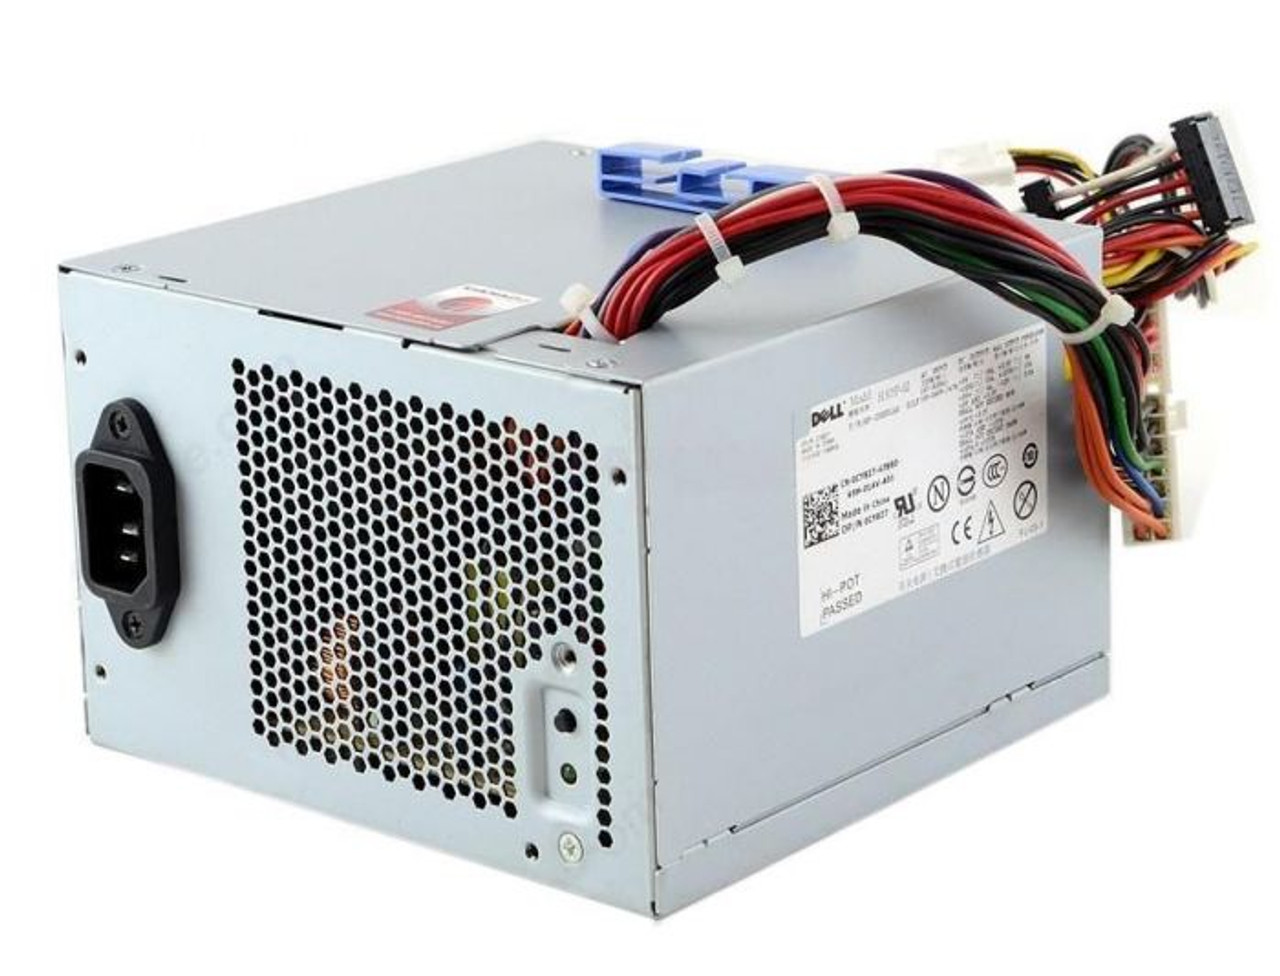 H305P | DELL | 305-WATTS POWER SUPPLY FOR OPTIPLEX GX620 AND DIMENSION 3100